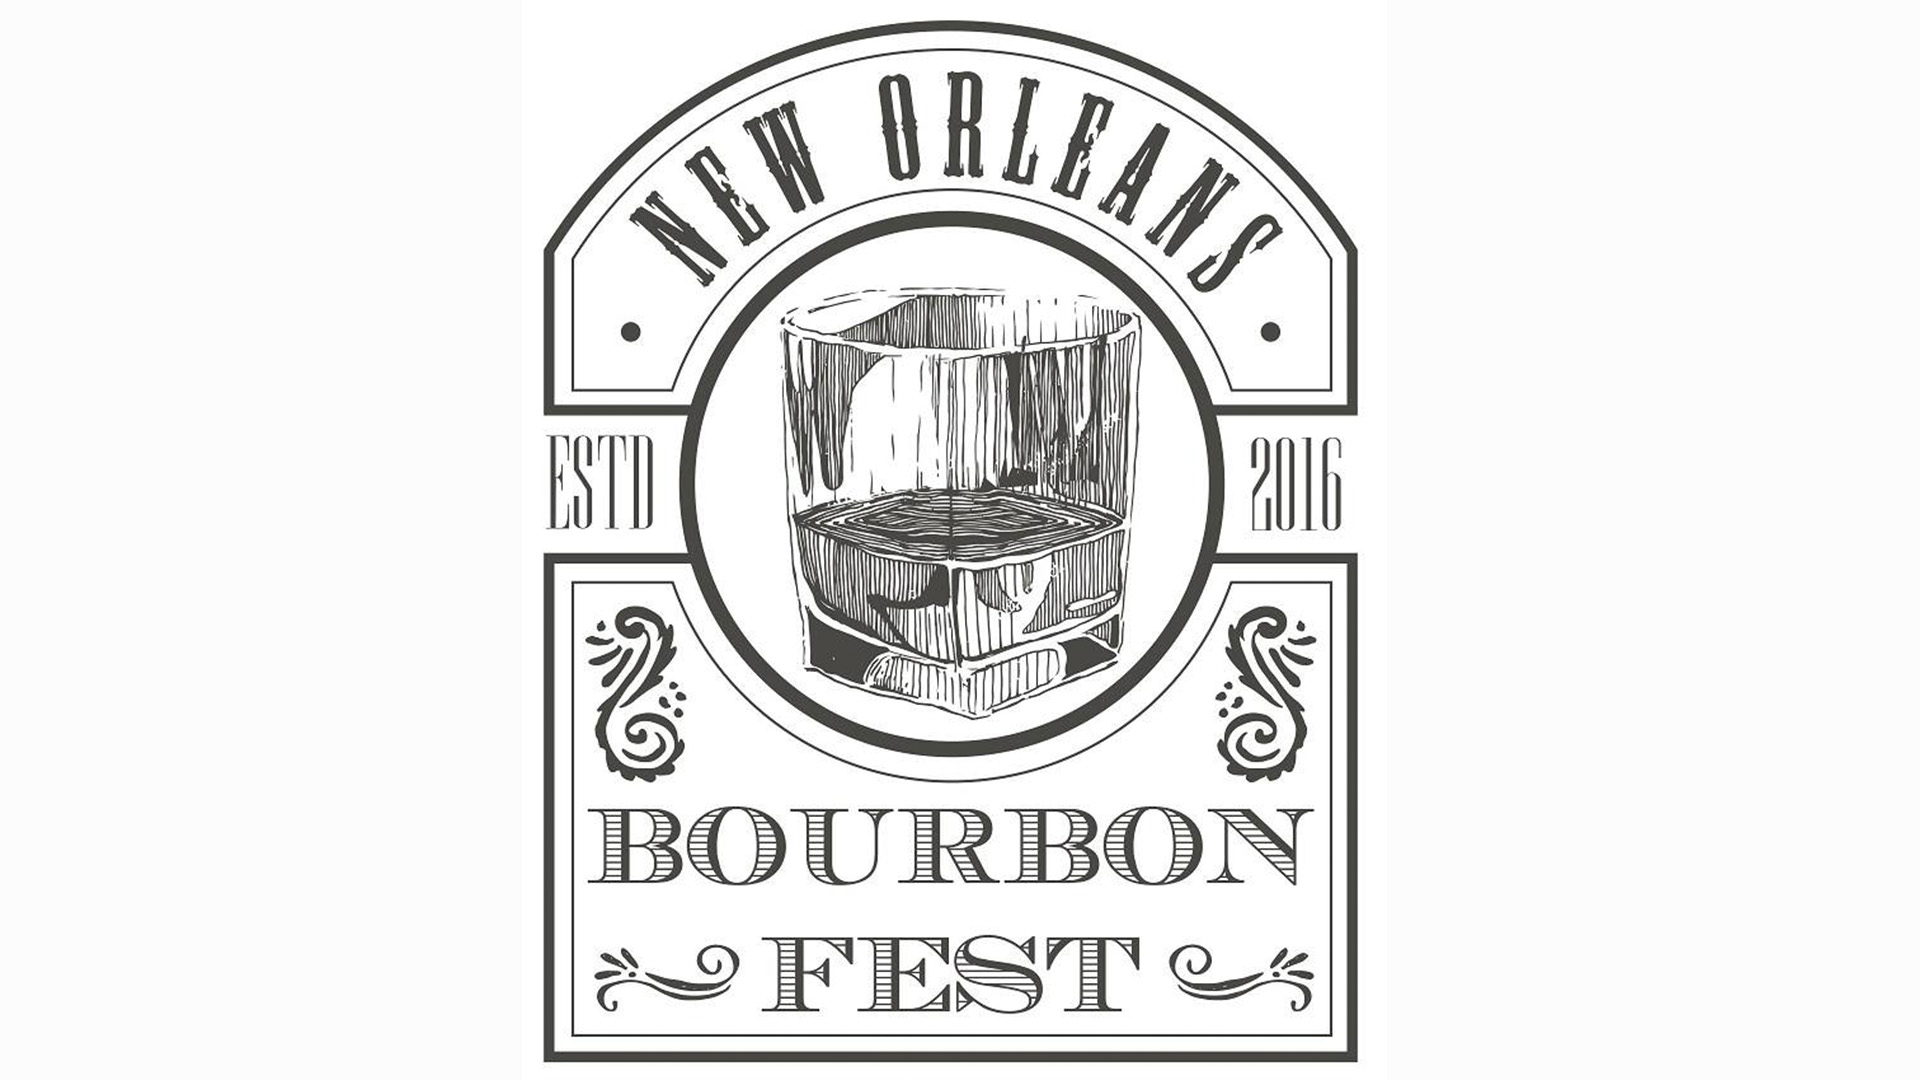 New Bourbon Festival coming to New Orleans